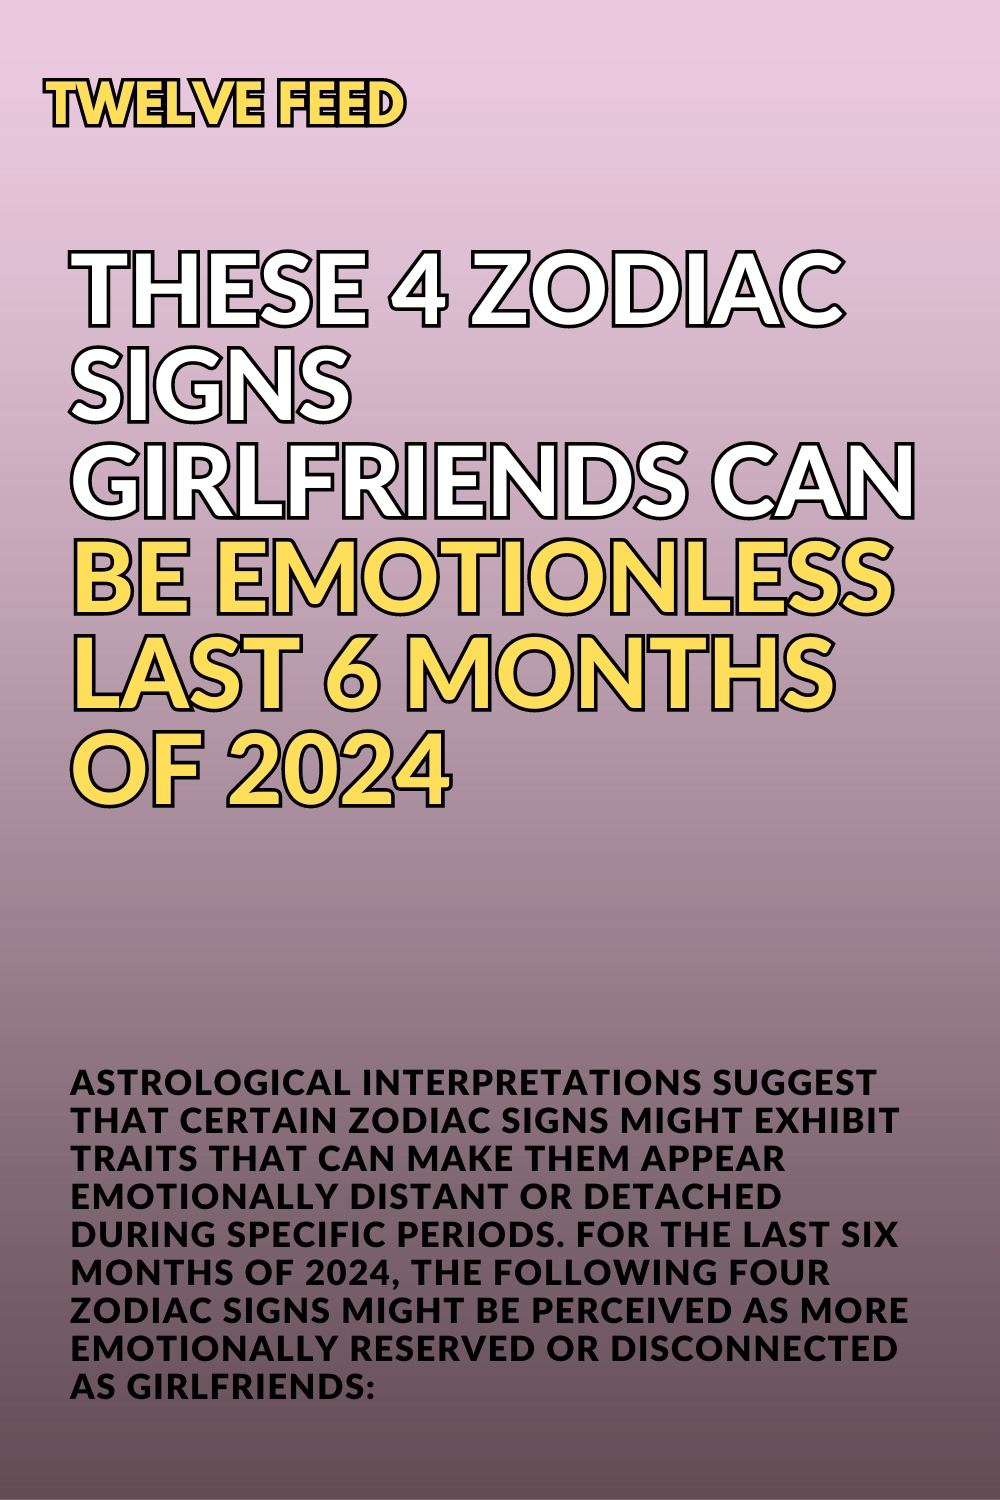 These 4 Zodiac Signs Girlfriends Can Be Emotionless Last 6 Months Of 2024